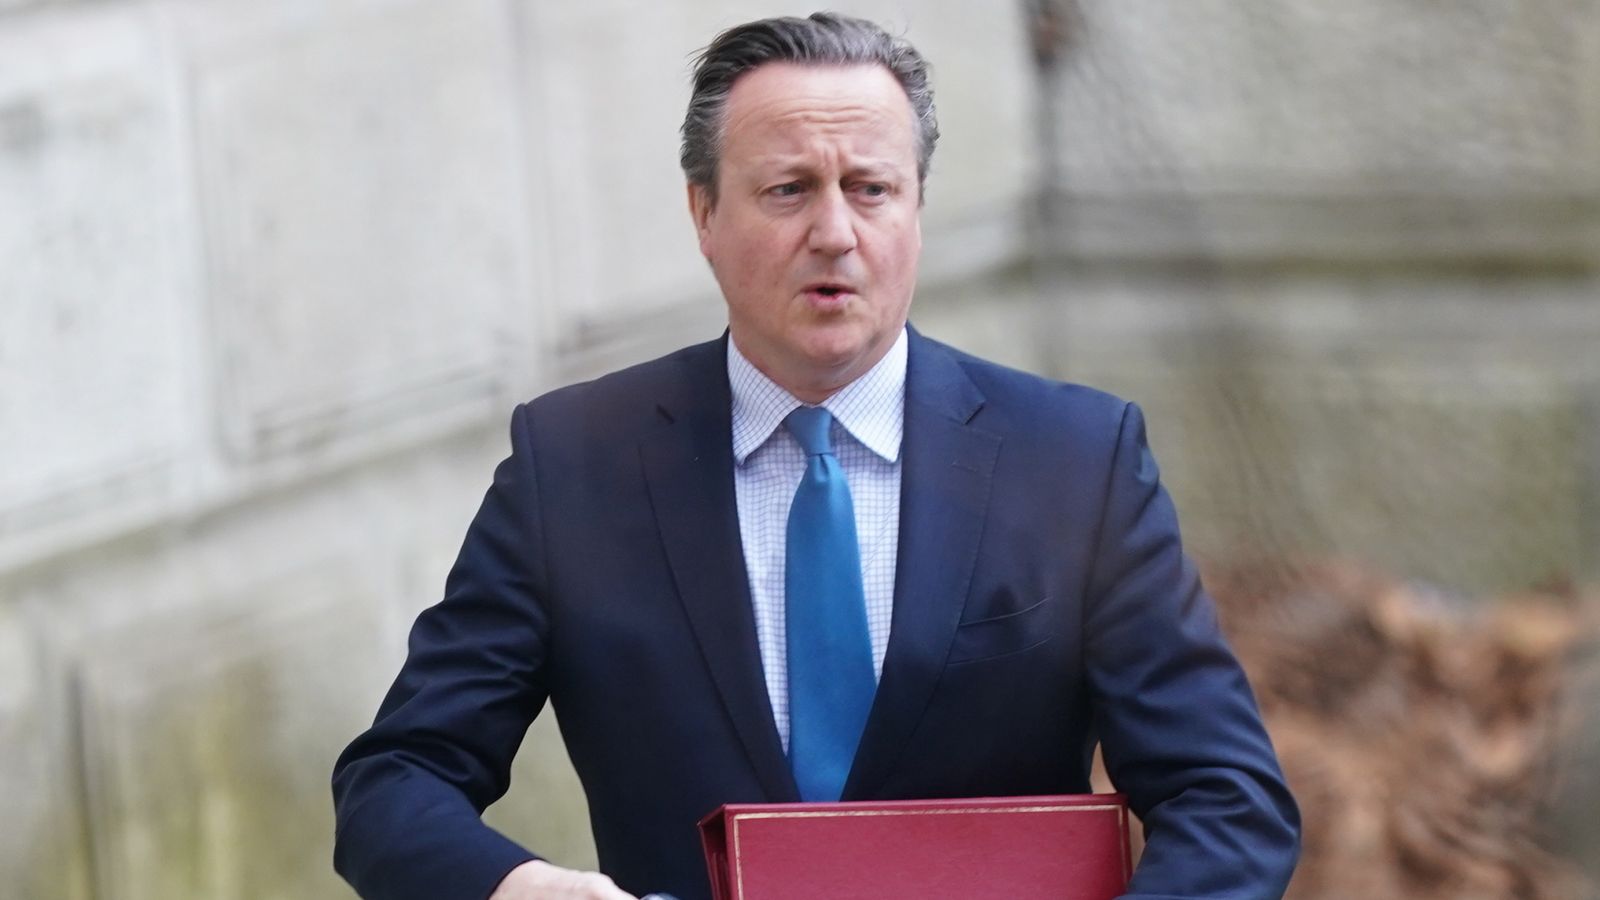 David Cameron holds talks with  Donald Trump as part of US visit